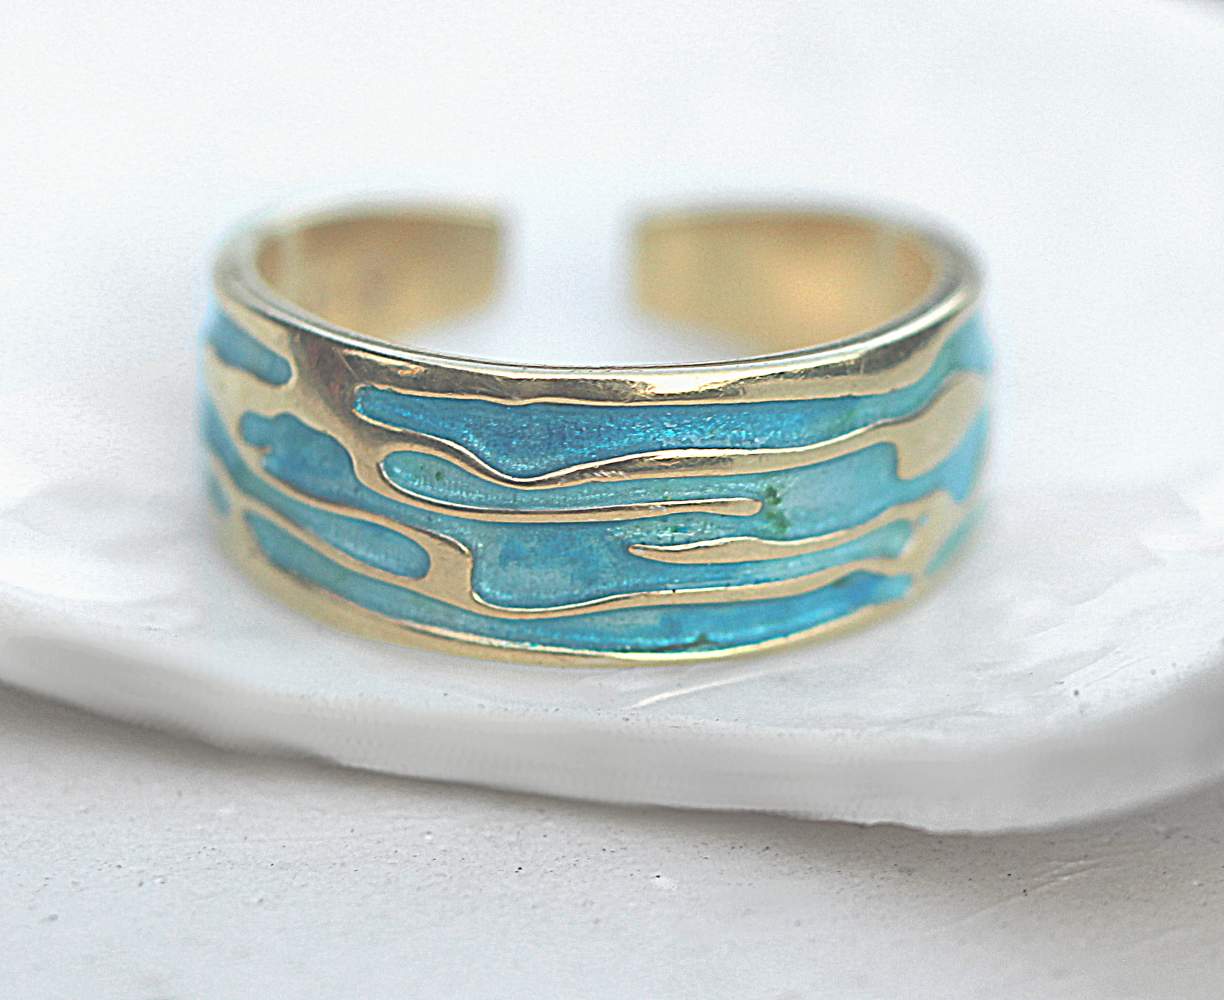 Ocean Ring. 18k gold plated sterling silver. Enamel in shades of turquoise